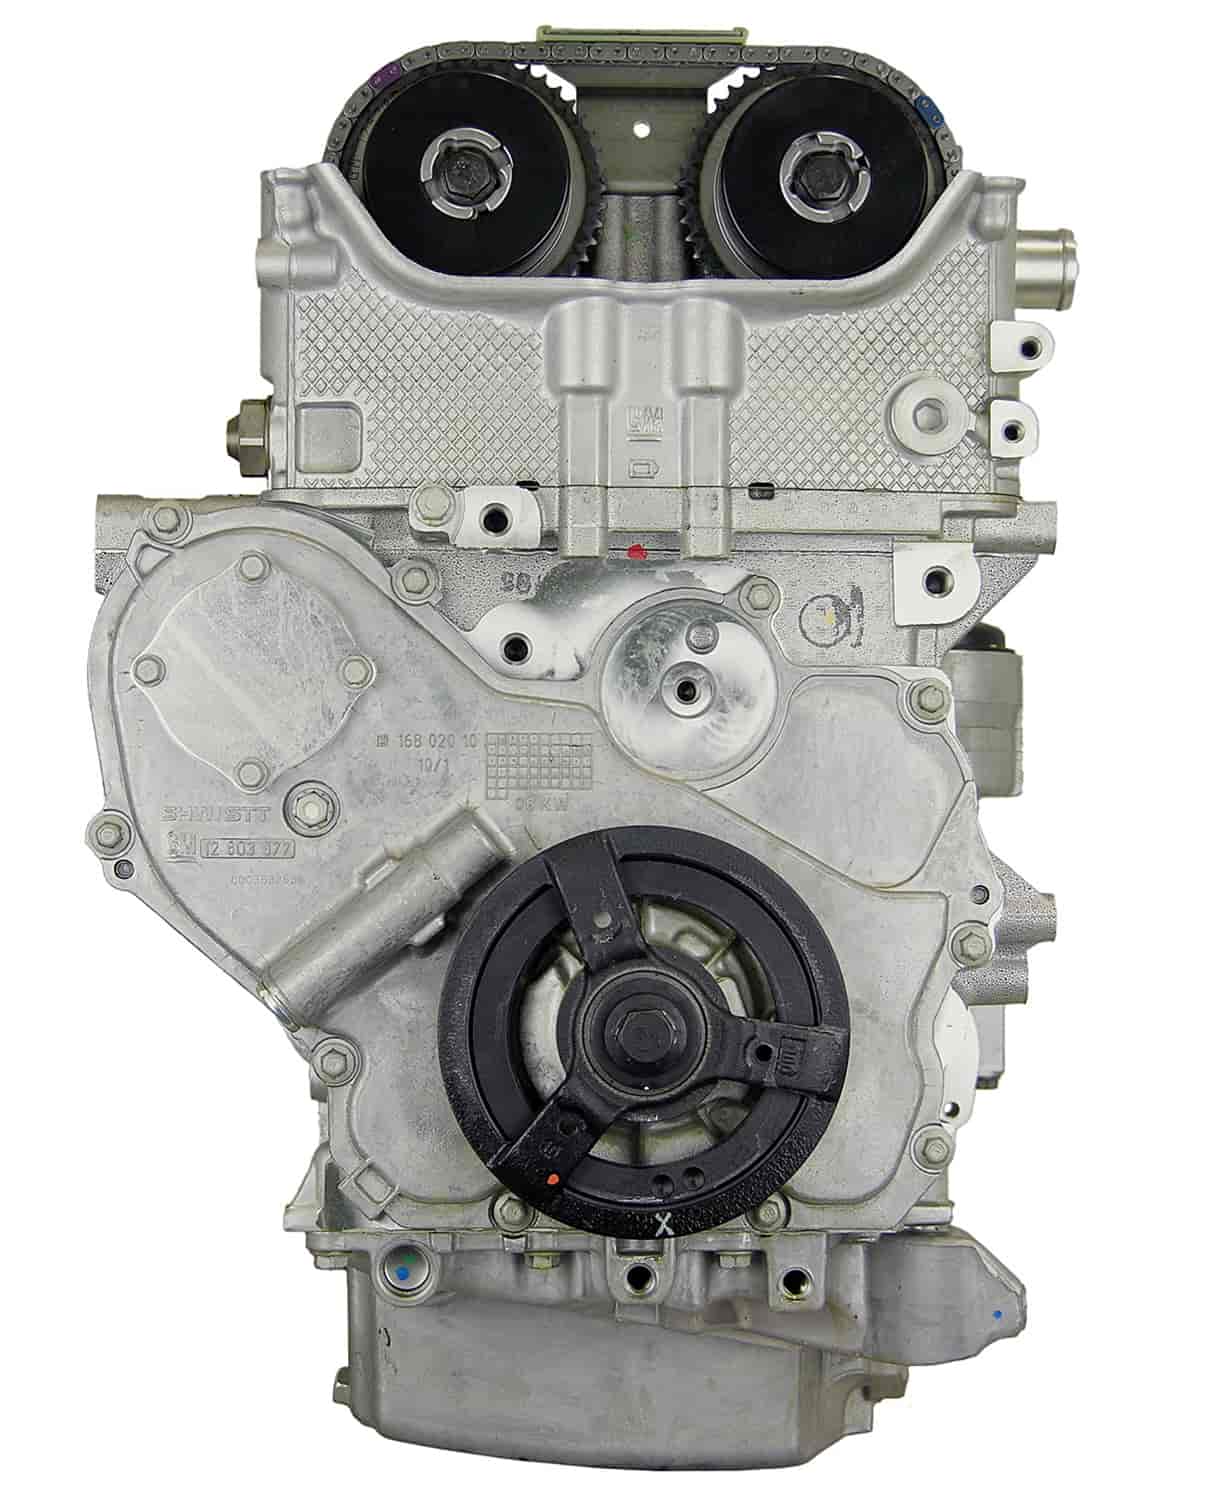 Remanufactured Crate Engine for 2006-2008 Chevy/Pontiac/Saturn